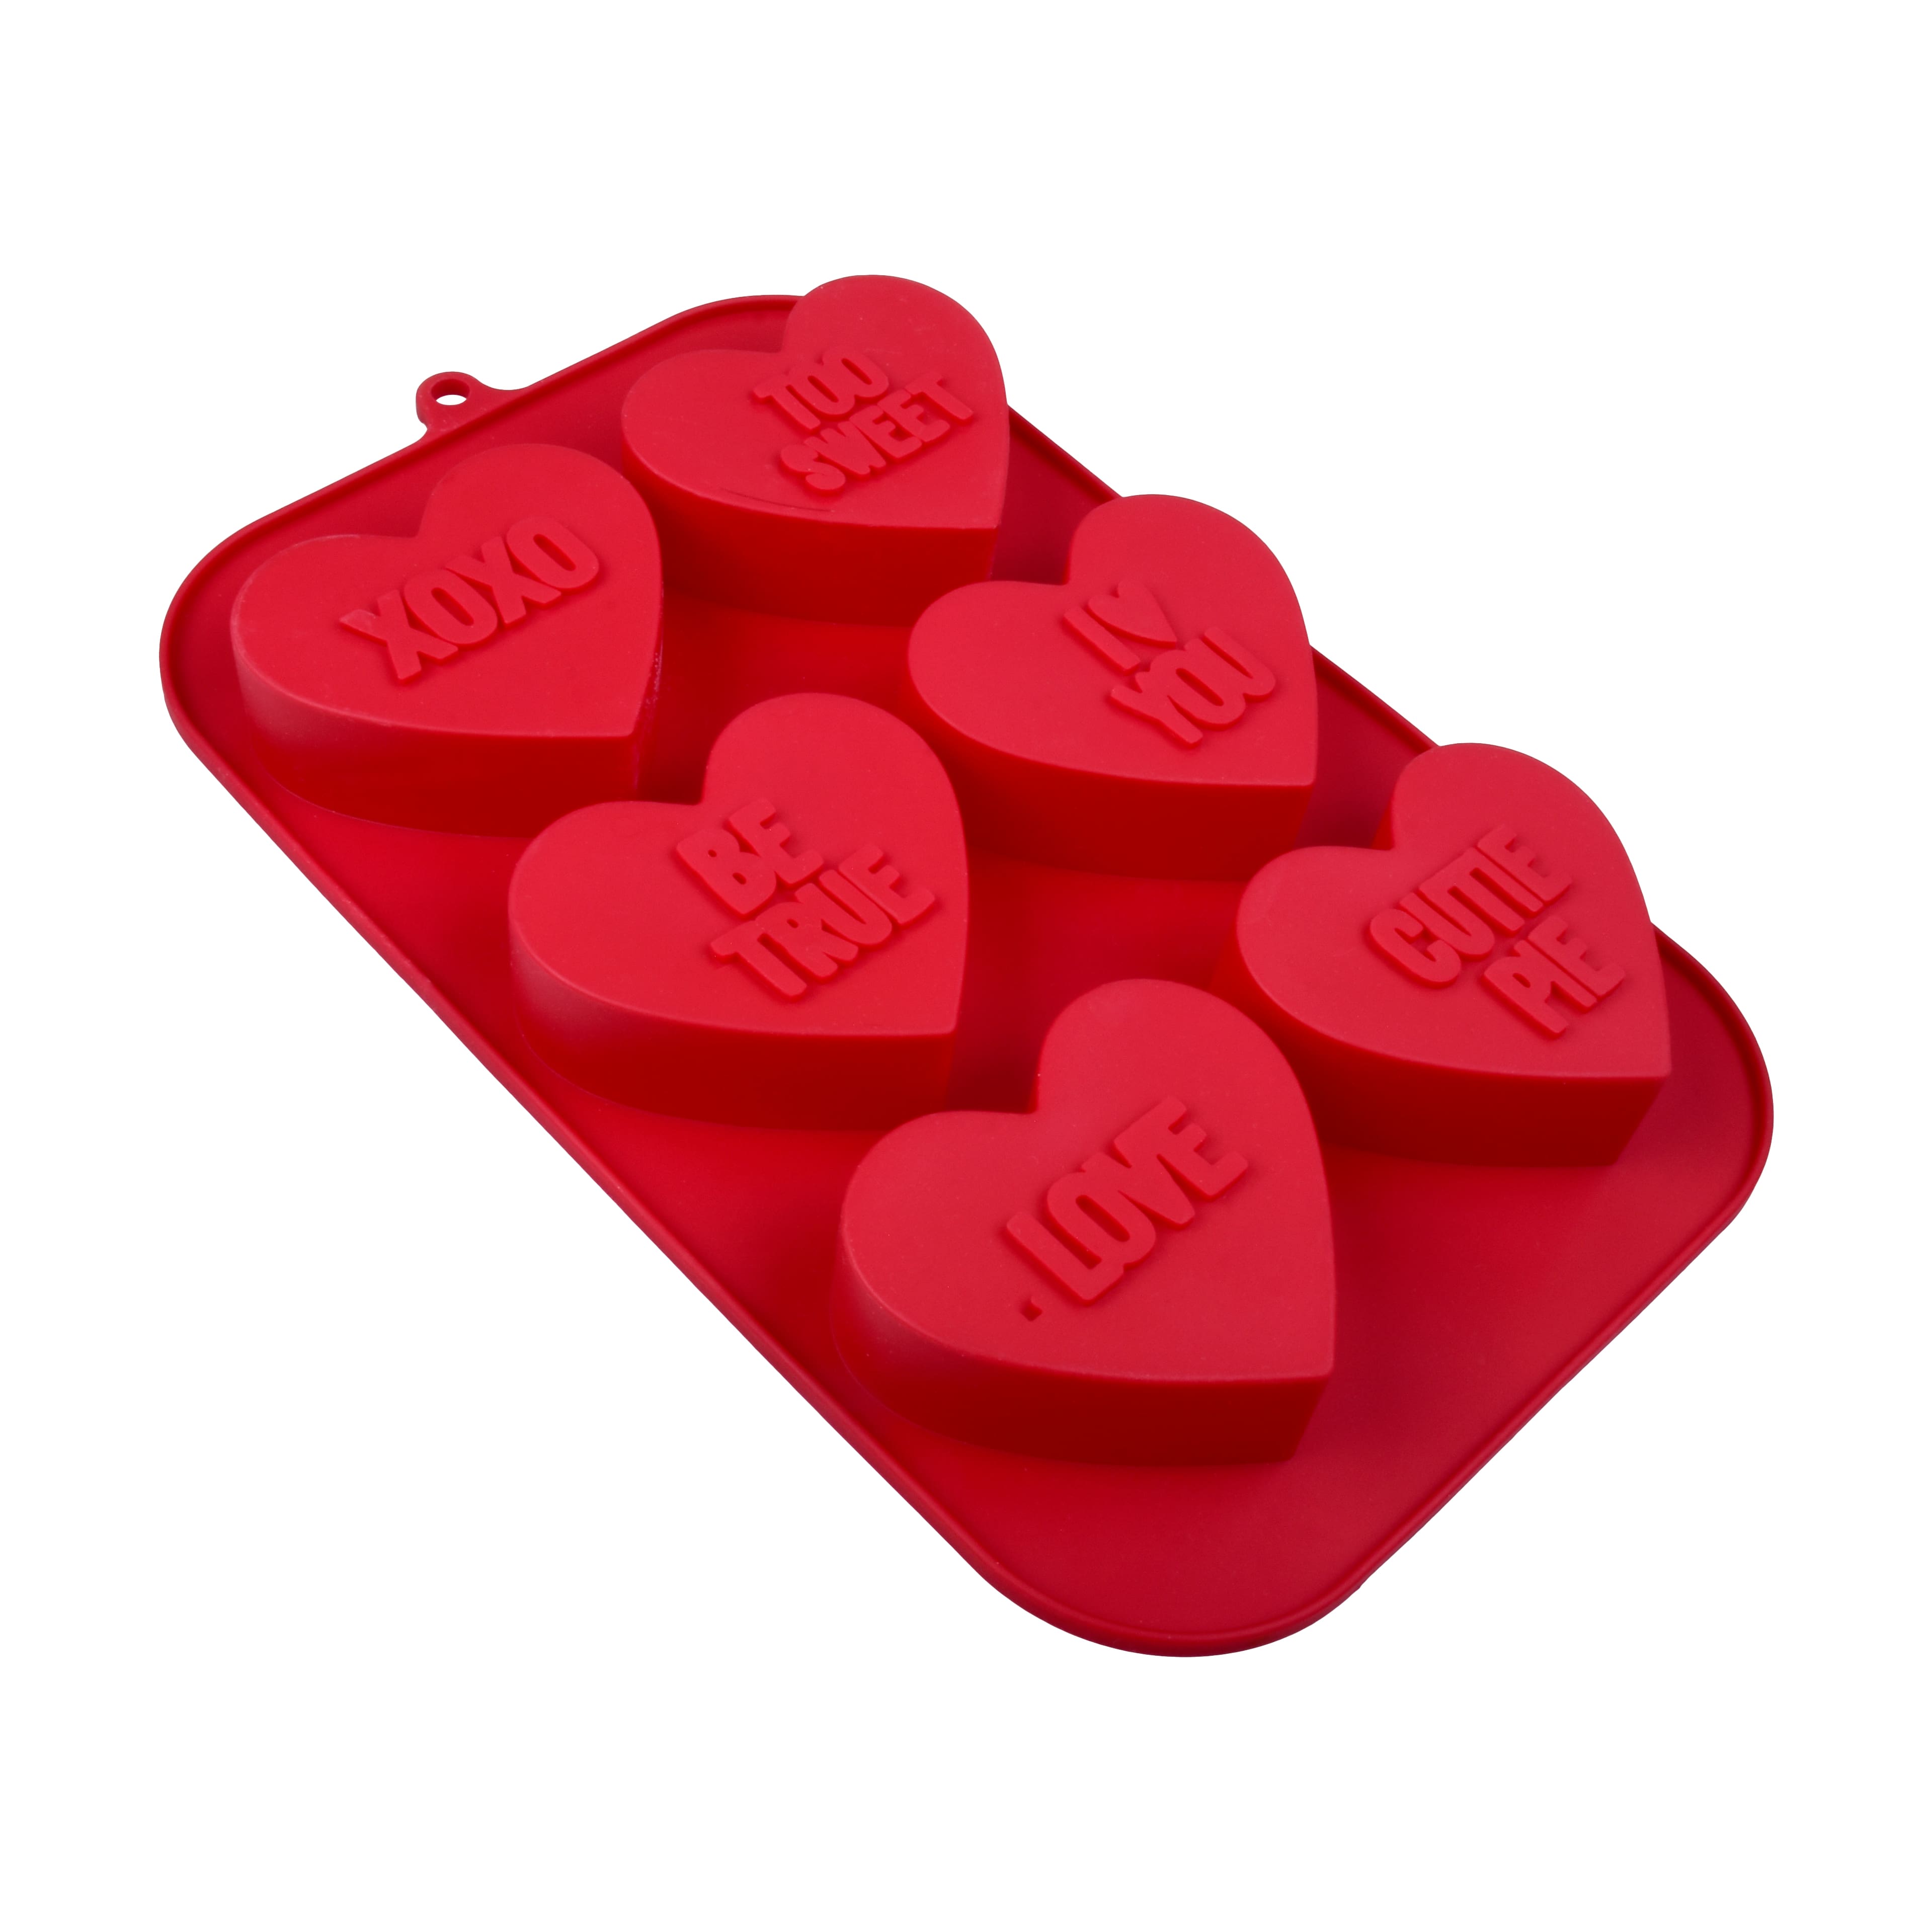 Conversation Hearts Silicone Mold SHINY Baking Candy Craft Resin